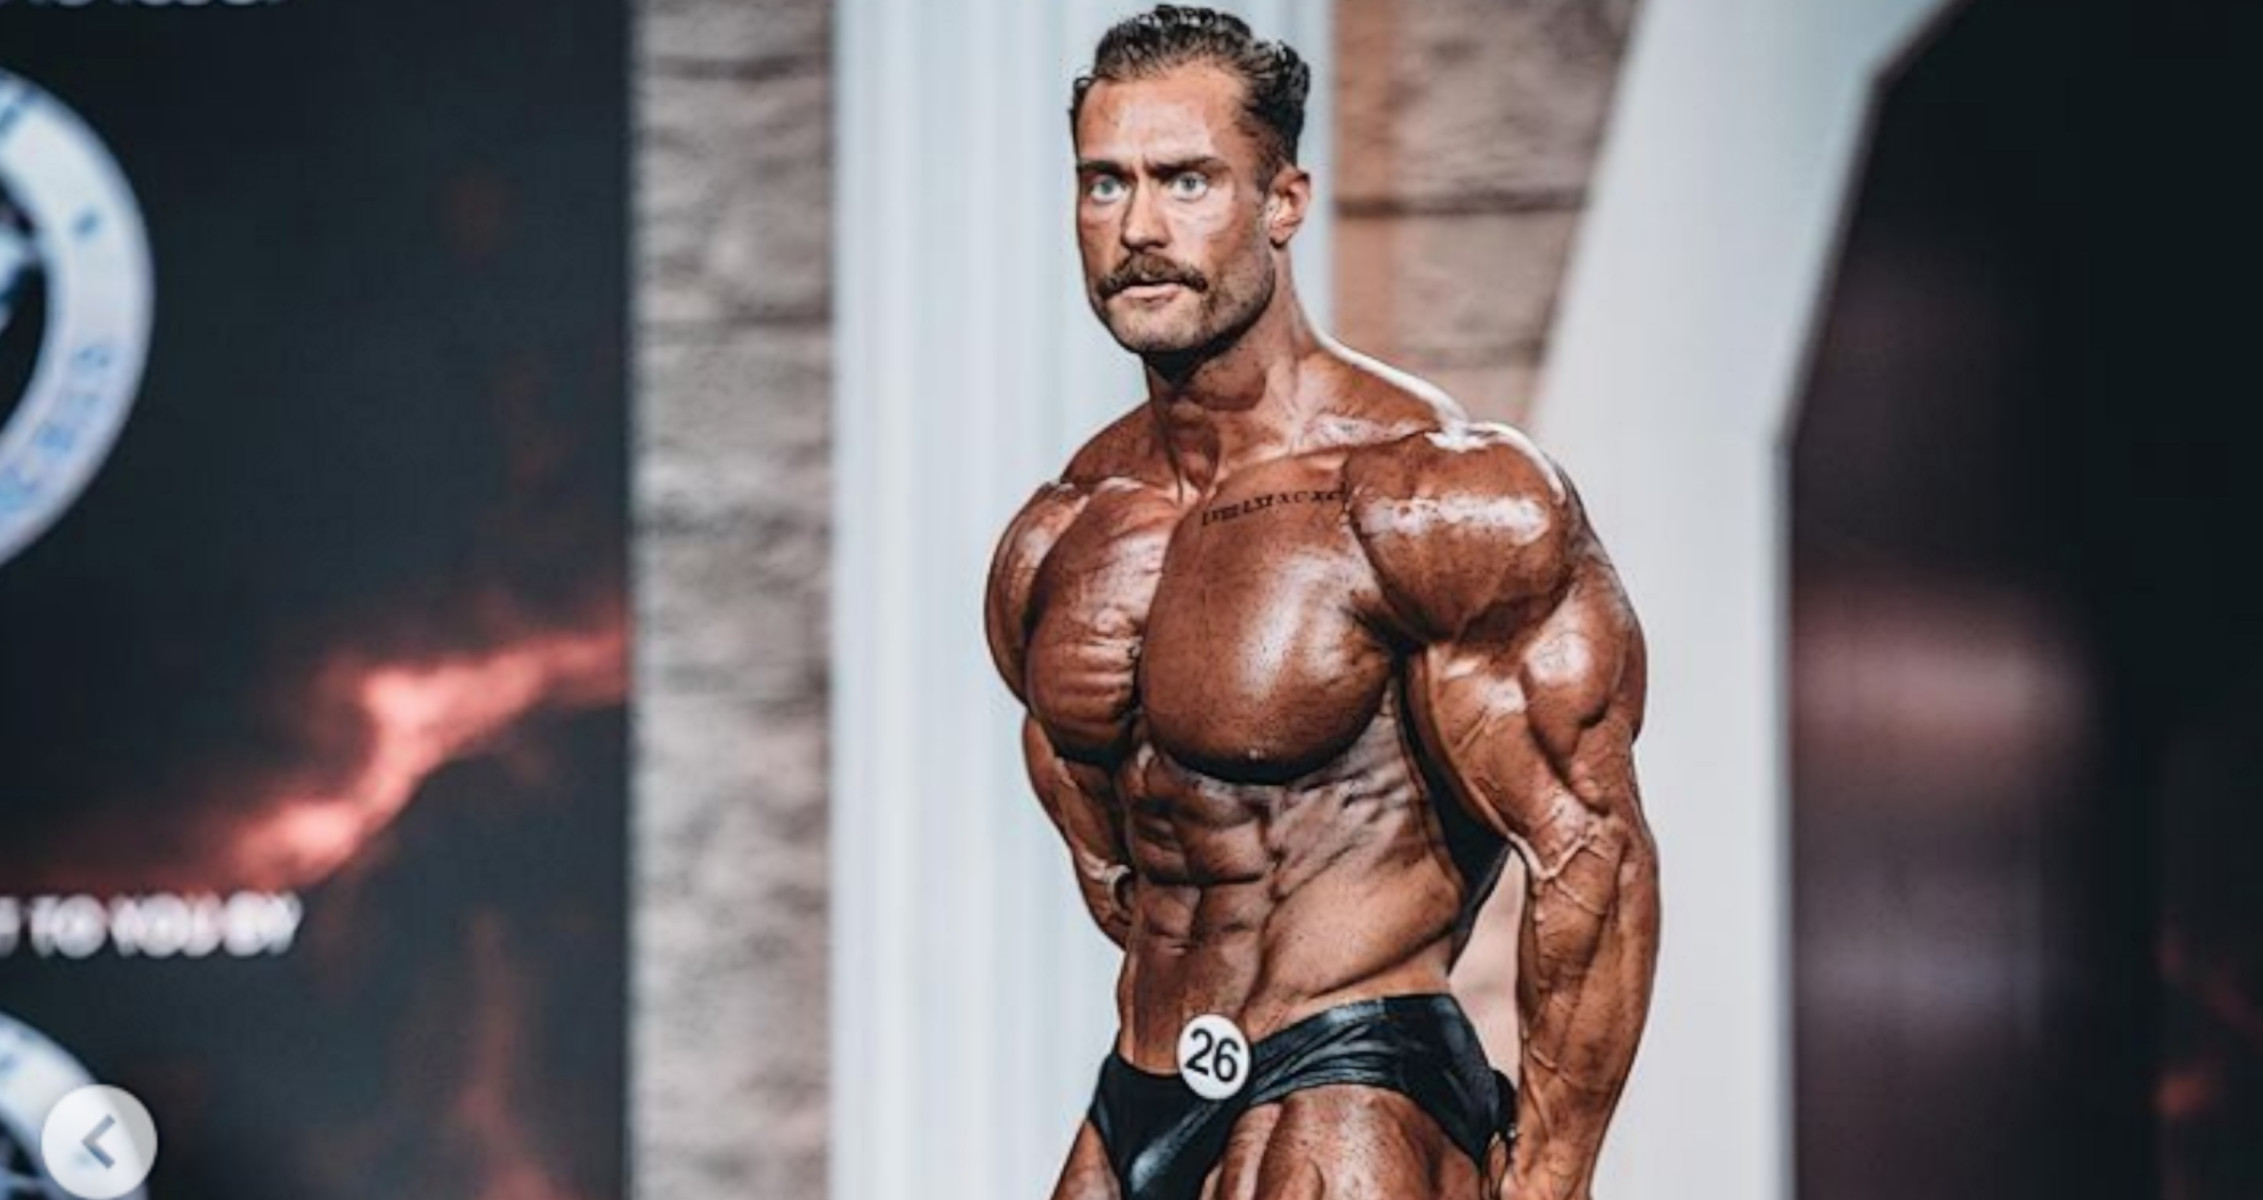 Chris Bumstead Gives Answer On Whether or Not to Use Steroids